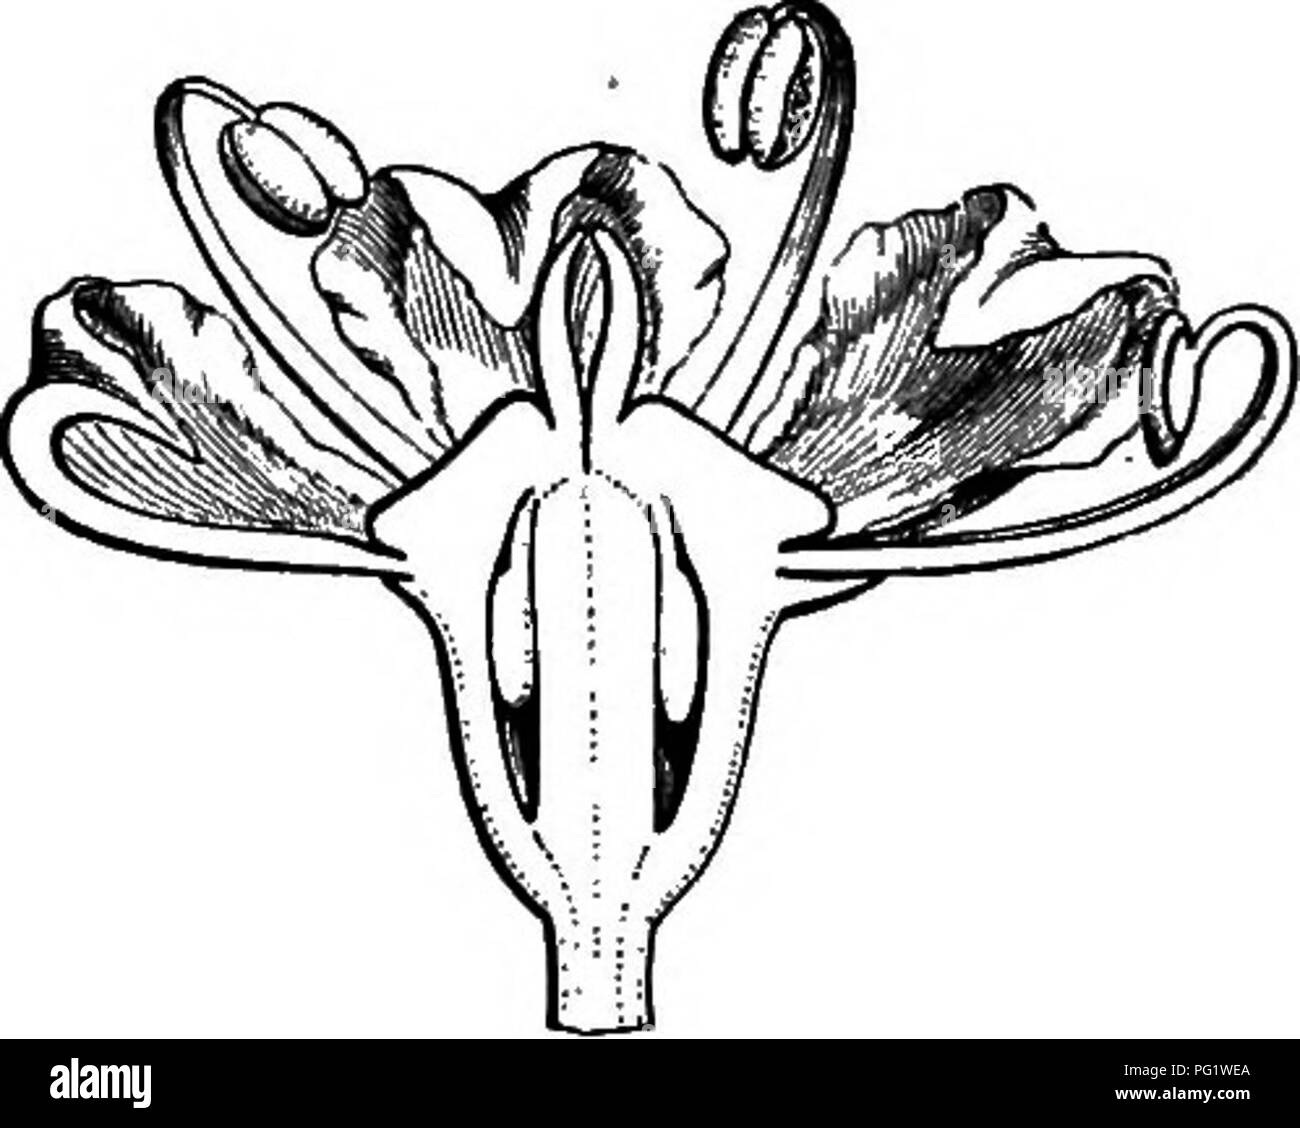 . The natural history of plants. Botany. Pig. 92. Flower (f ). Fig. 94. Fruit. Fig. 93. Long. sect, of flower. the wing of the fruit is sometimes, but not constantly, a little thicker. Heradeum comprises biennial or oftener perennial herbs from the temperate regions of the northern hemisphere, with wide leayes often divided into lobes themselves wide ; rarely pinnate, oftener compound- or ternate-pinnate. Some of these plants inhabit Abyssinia, India and North America. Equally near are Malabaila and Opopanax, which we cannot separate generically from each other. The former has oboval or orbicu Stock Photo